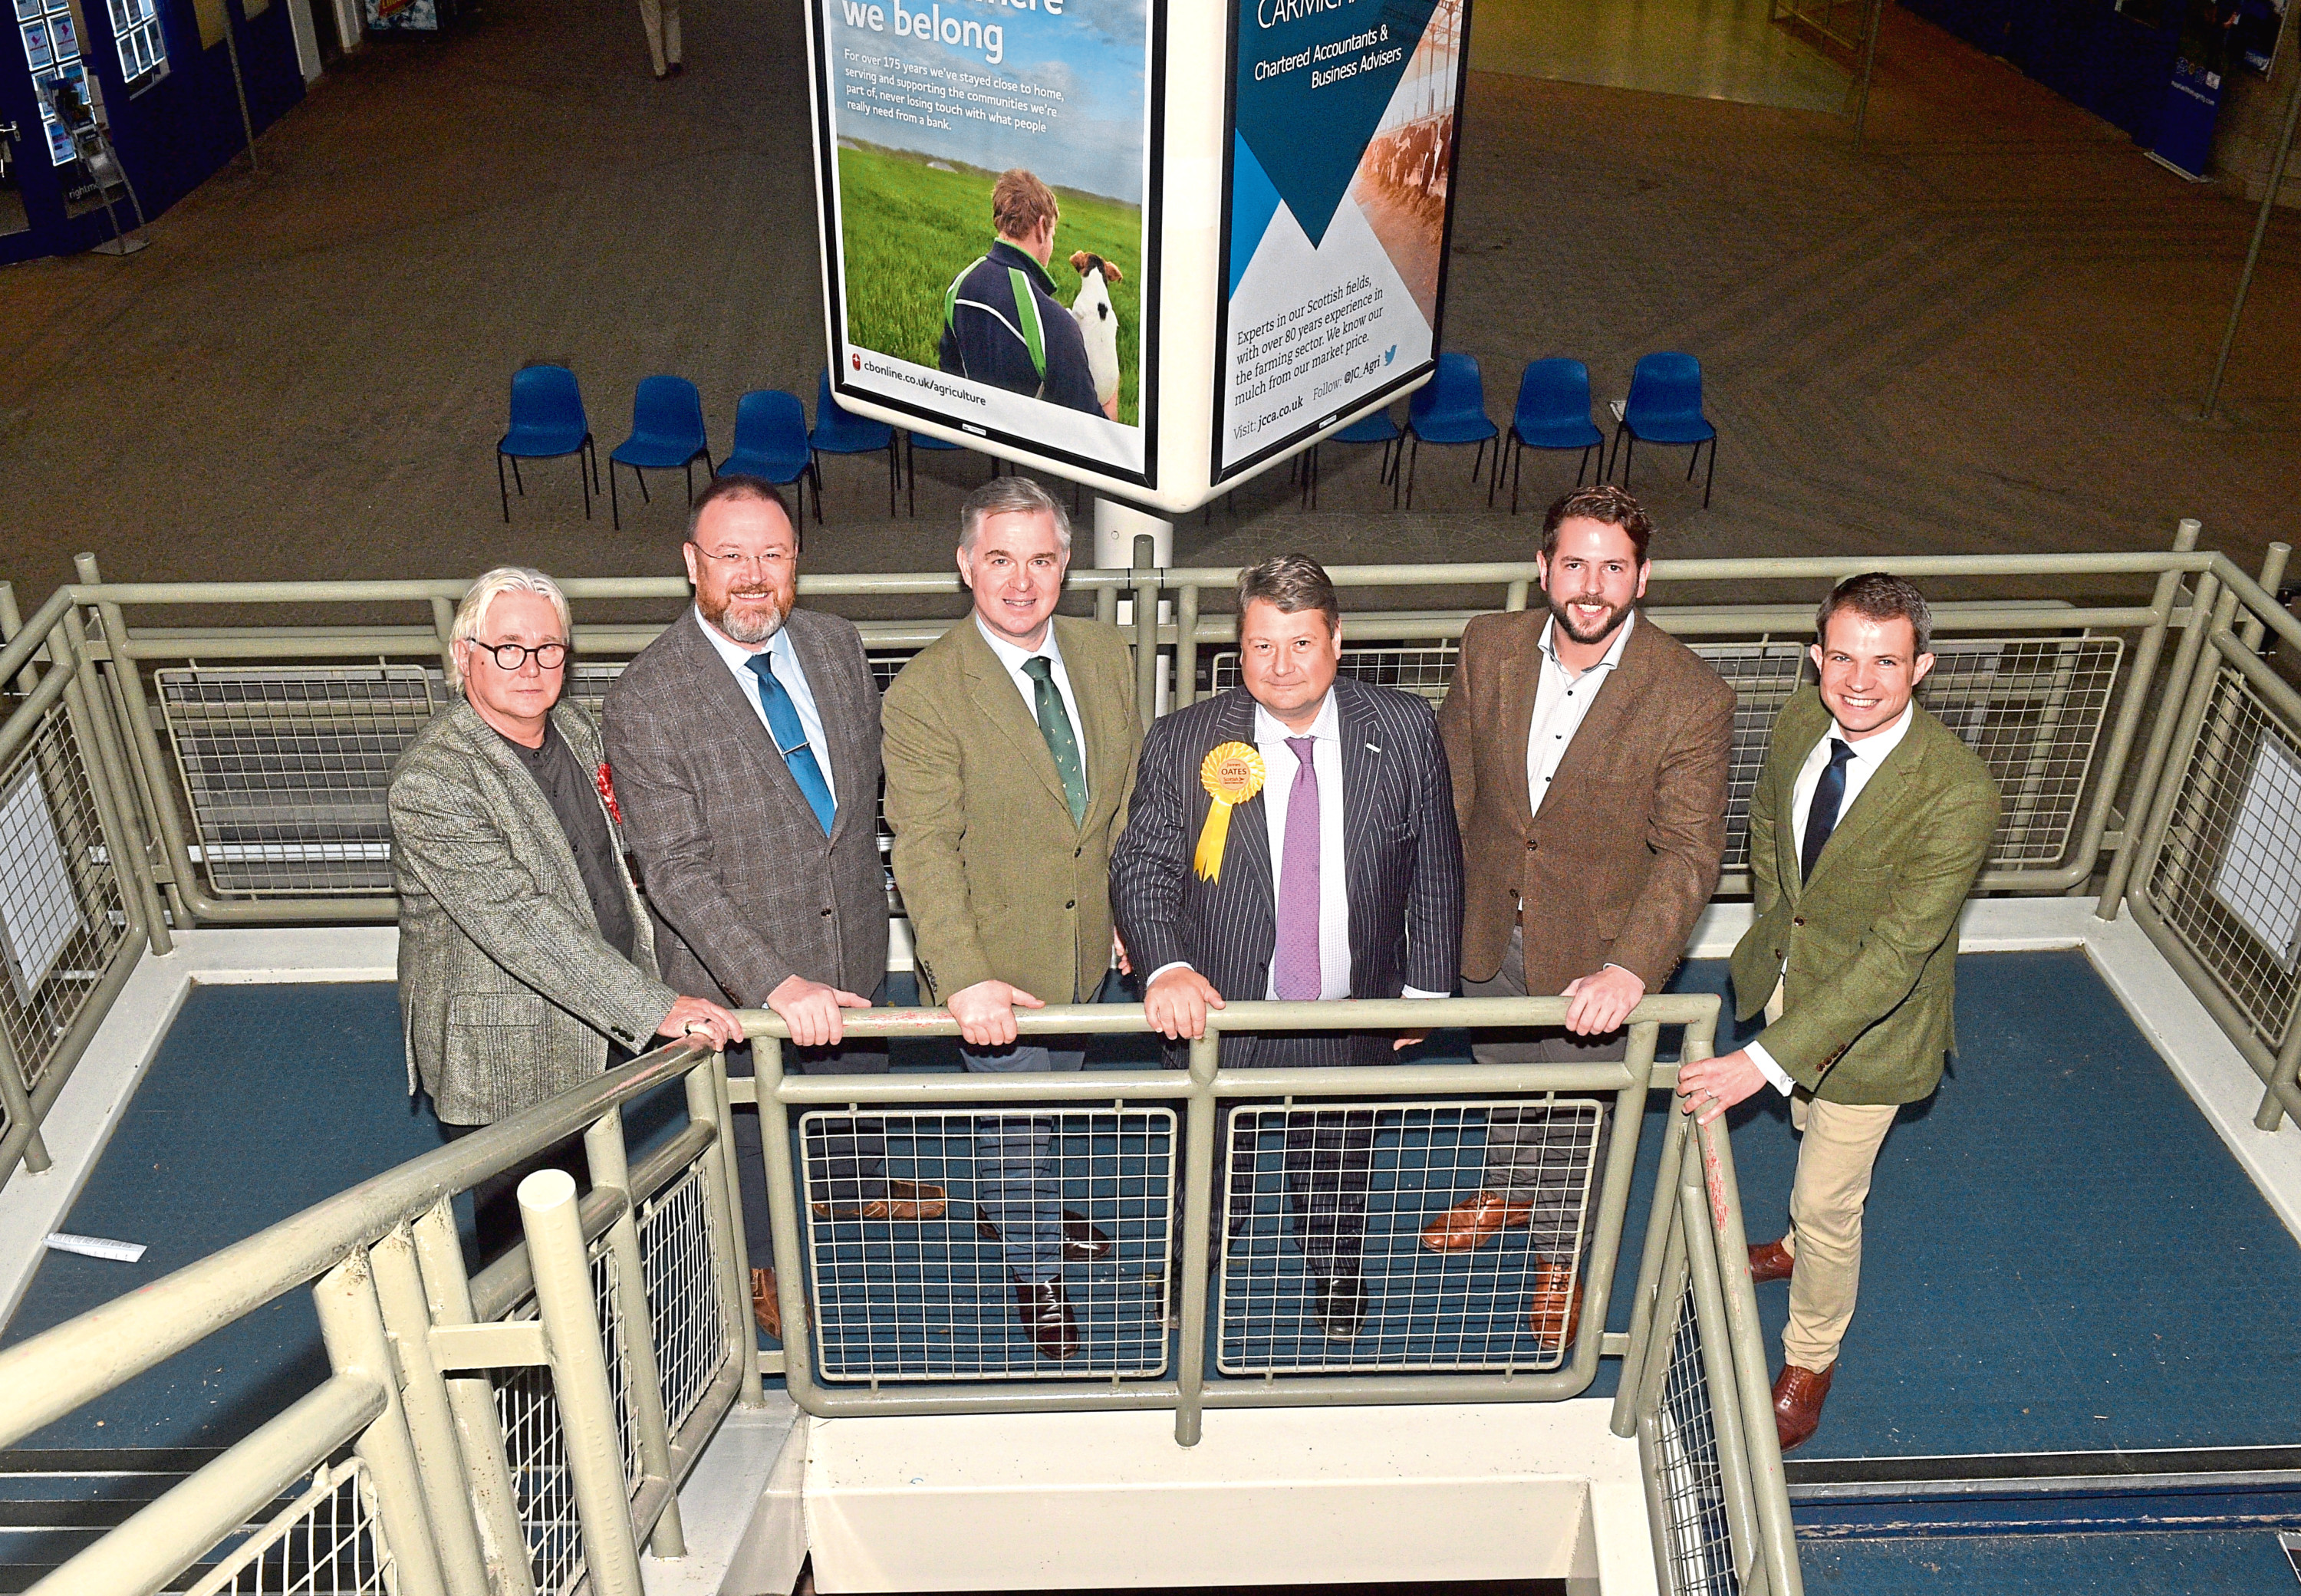 Pictured are from left, Brian Balcombe (Labour), David Duguid (Conservative), Colin Clark (Conservative), James Oates (Lib Dem), Fergus Mutch (SNP) and Andrew Bowie (Conservative).